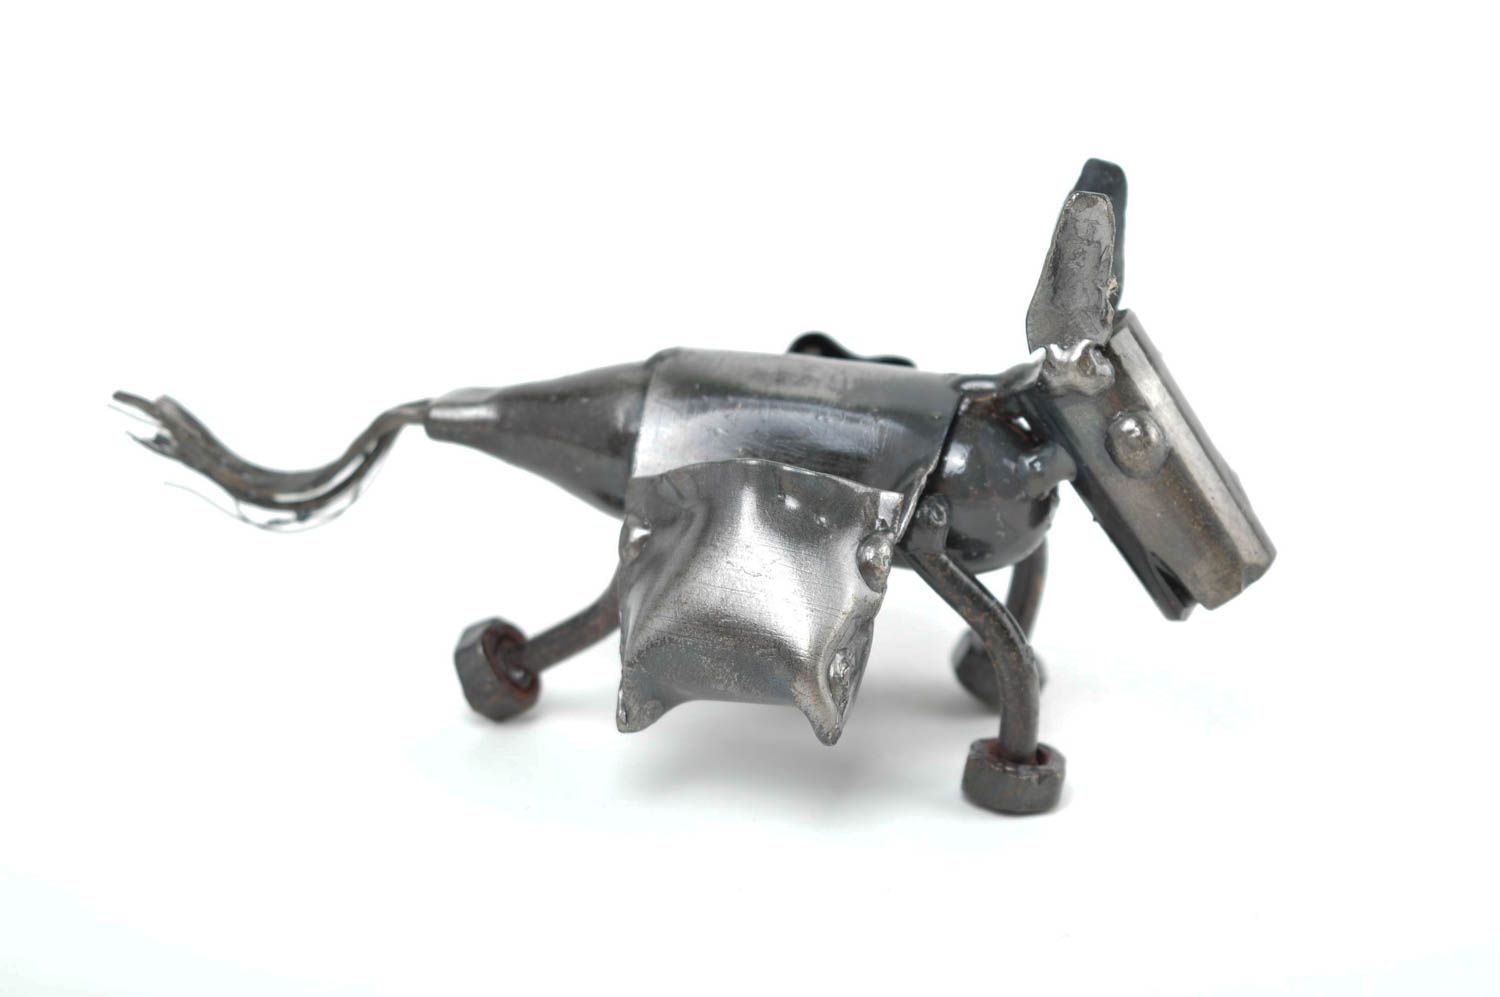 Unusual handmade metal figurine table decor ideas buy a gift decorative use only photo 4